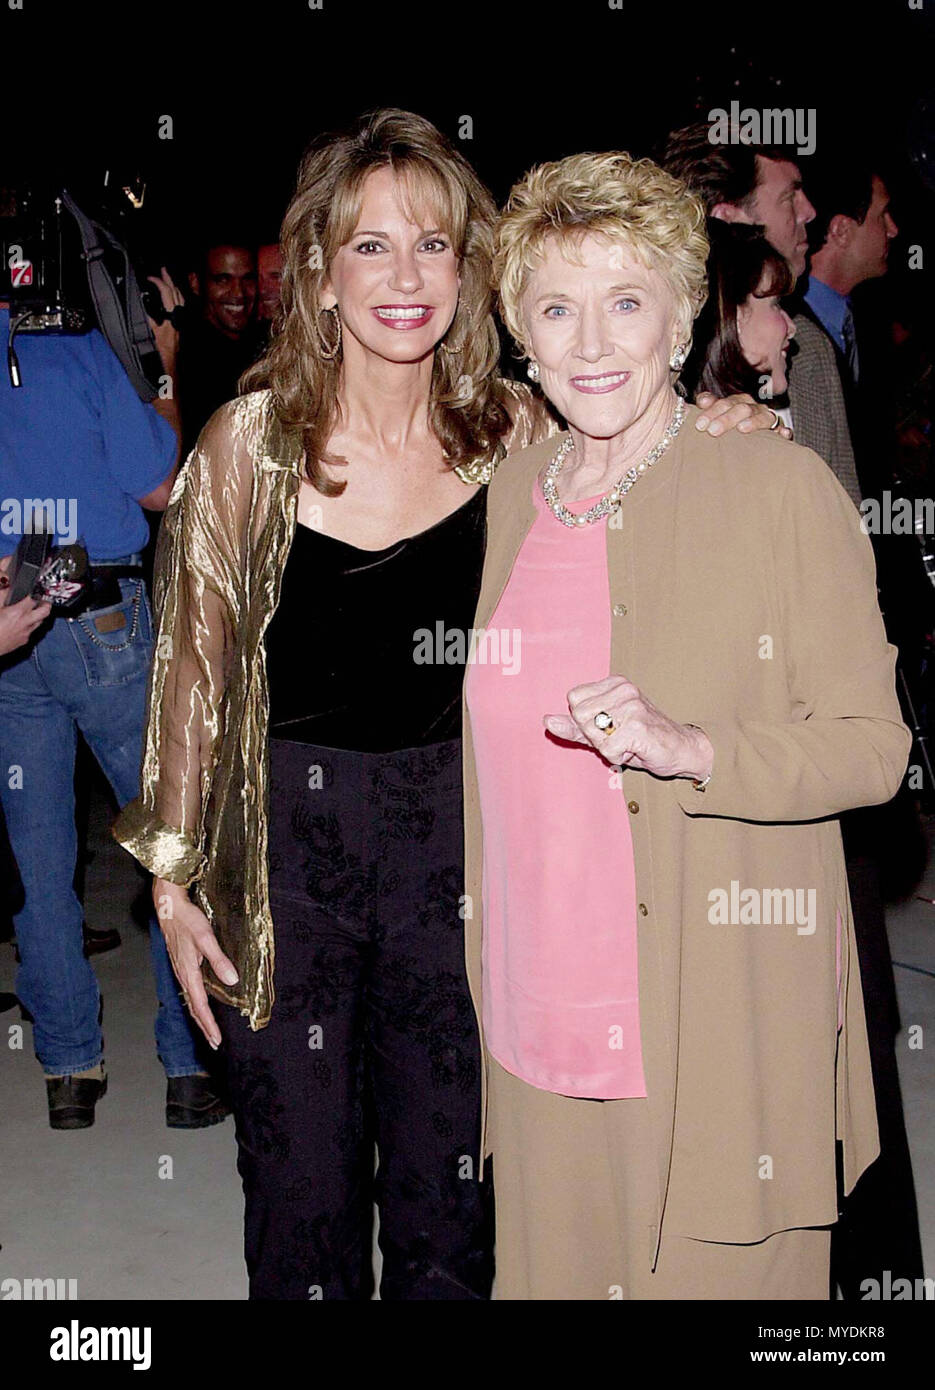 28 Sep 2000, Los Angeles, California, USA --- Original caption: The Young & the Restless celebrates the taping of its 7,000th episode at the CBS studio in Los Angeles. --- Image by © . / USAJess Walton with Jeanne Cooper Red Carpet Event, Vertical, USA, Film Industry, Celebrities,  Photography, Bestof, Arts Culture and Entertainment, Topix Celebrities fashion /  Vertical, Best of, Event in Hollywood Life - California,  Red Carpet and backstage, USA, Film Industry, Celebrities,  movie celebrities, TV celebrities, Music celebrities, Photography, Bestof, Arts Culture and Entertainment,  Topix,  v Stock Photo